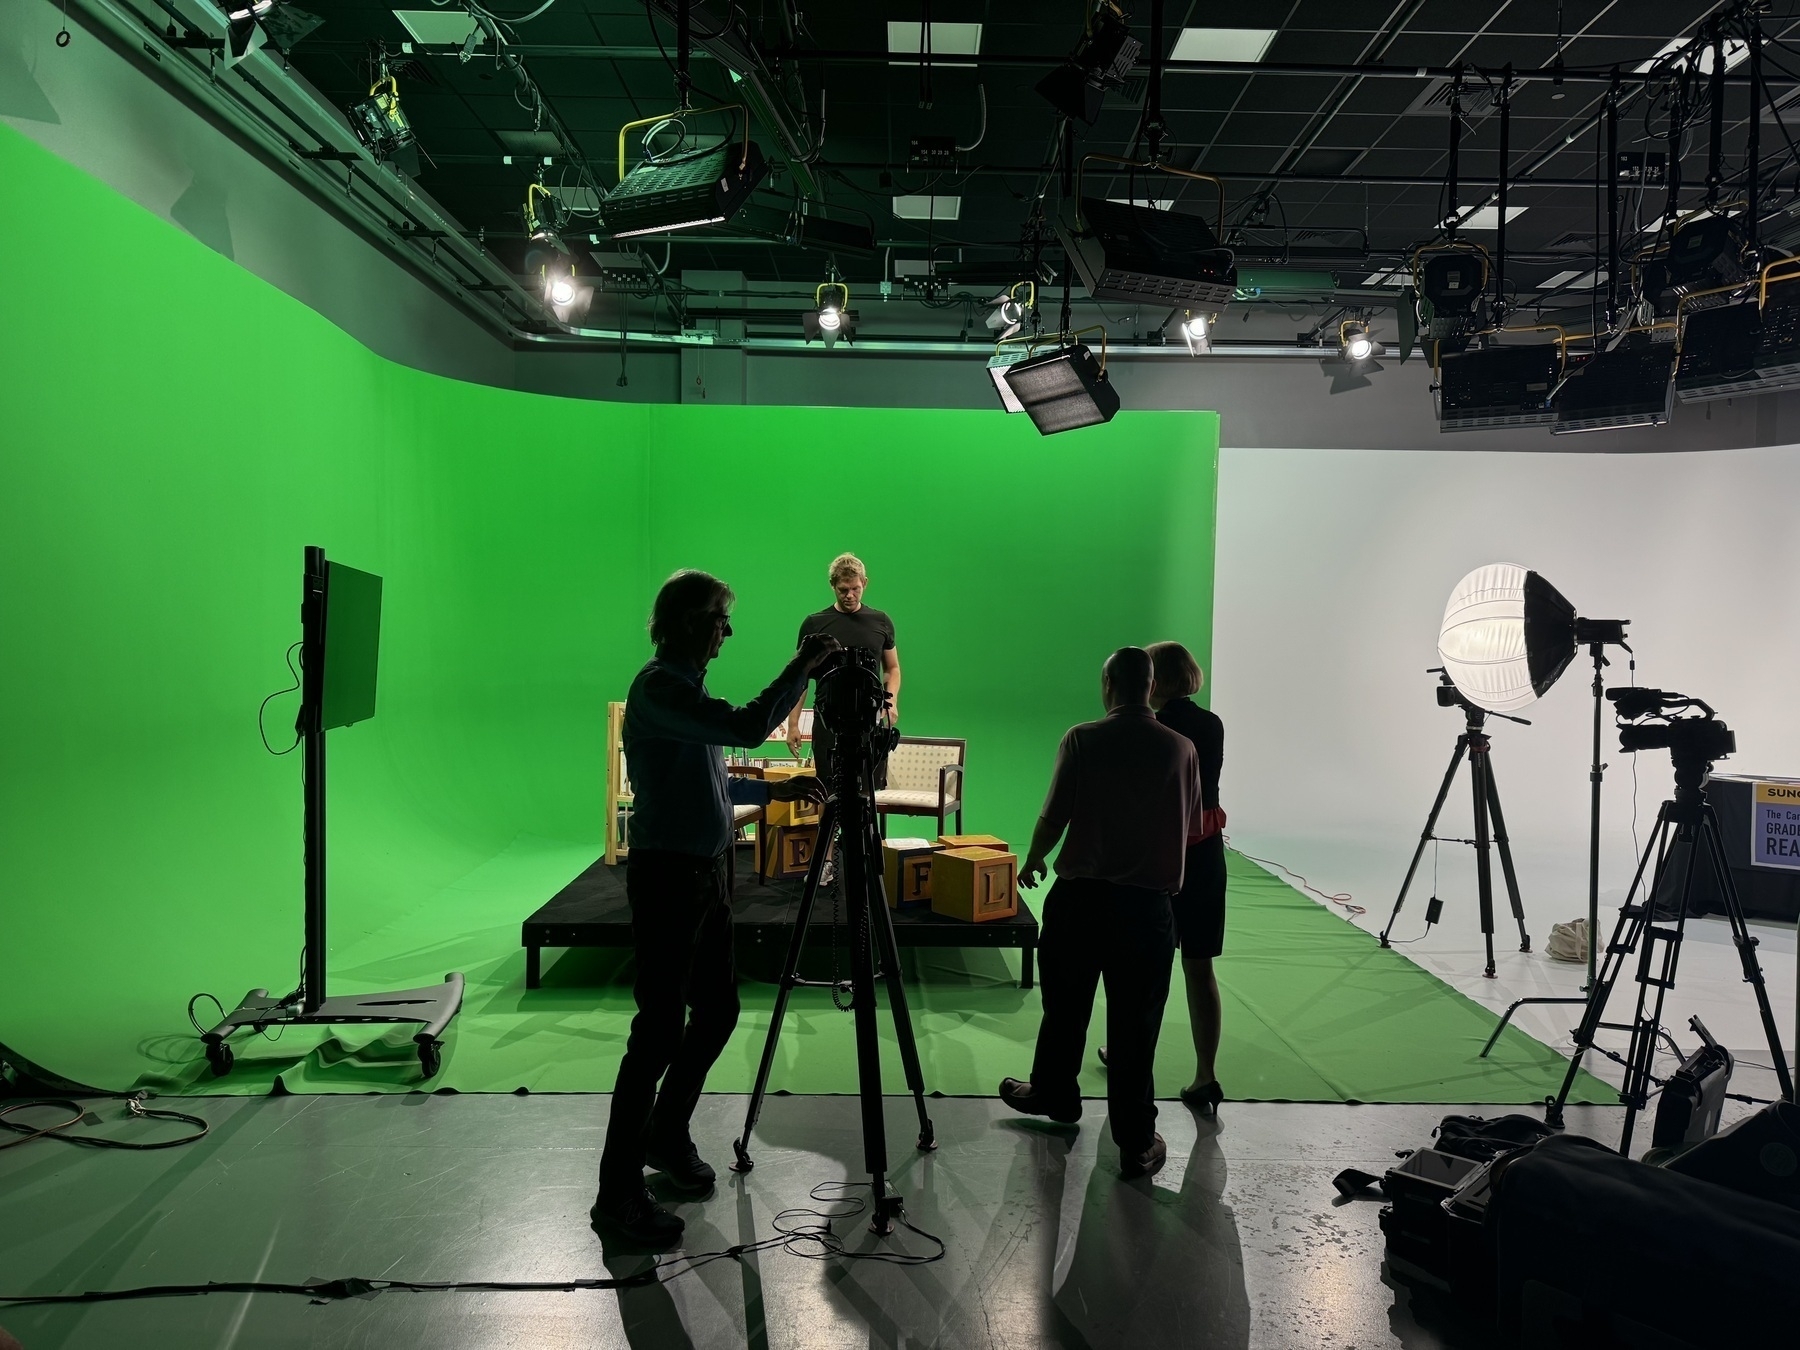 Auto-generated description: A group of people is working with cameras and equipment in a studio with a green screen and stage setup.